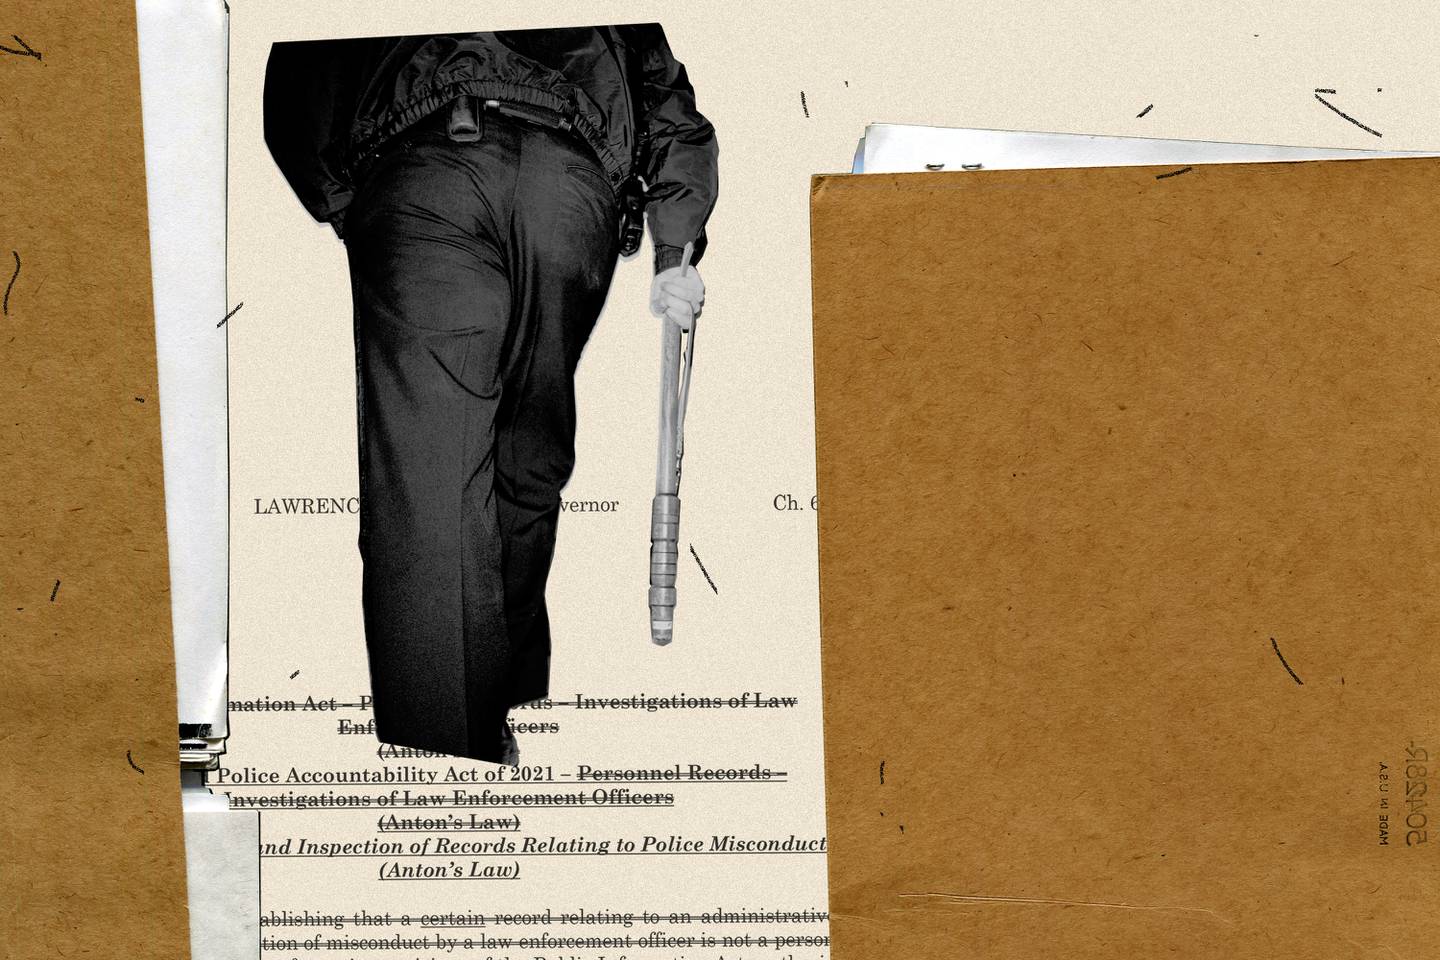 Photo collage of police officer holding baton, walking away in between two close-up images of folders full of documents, with an excerpt from the Maryland Police Accountability Act of 2021 in background.